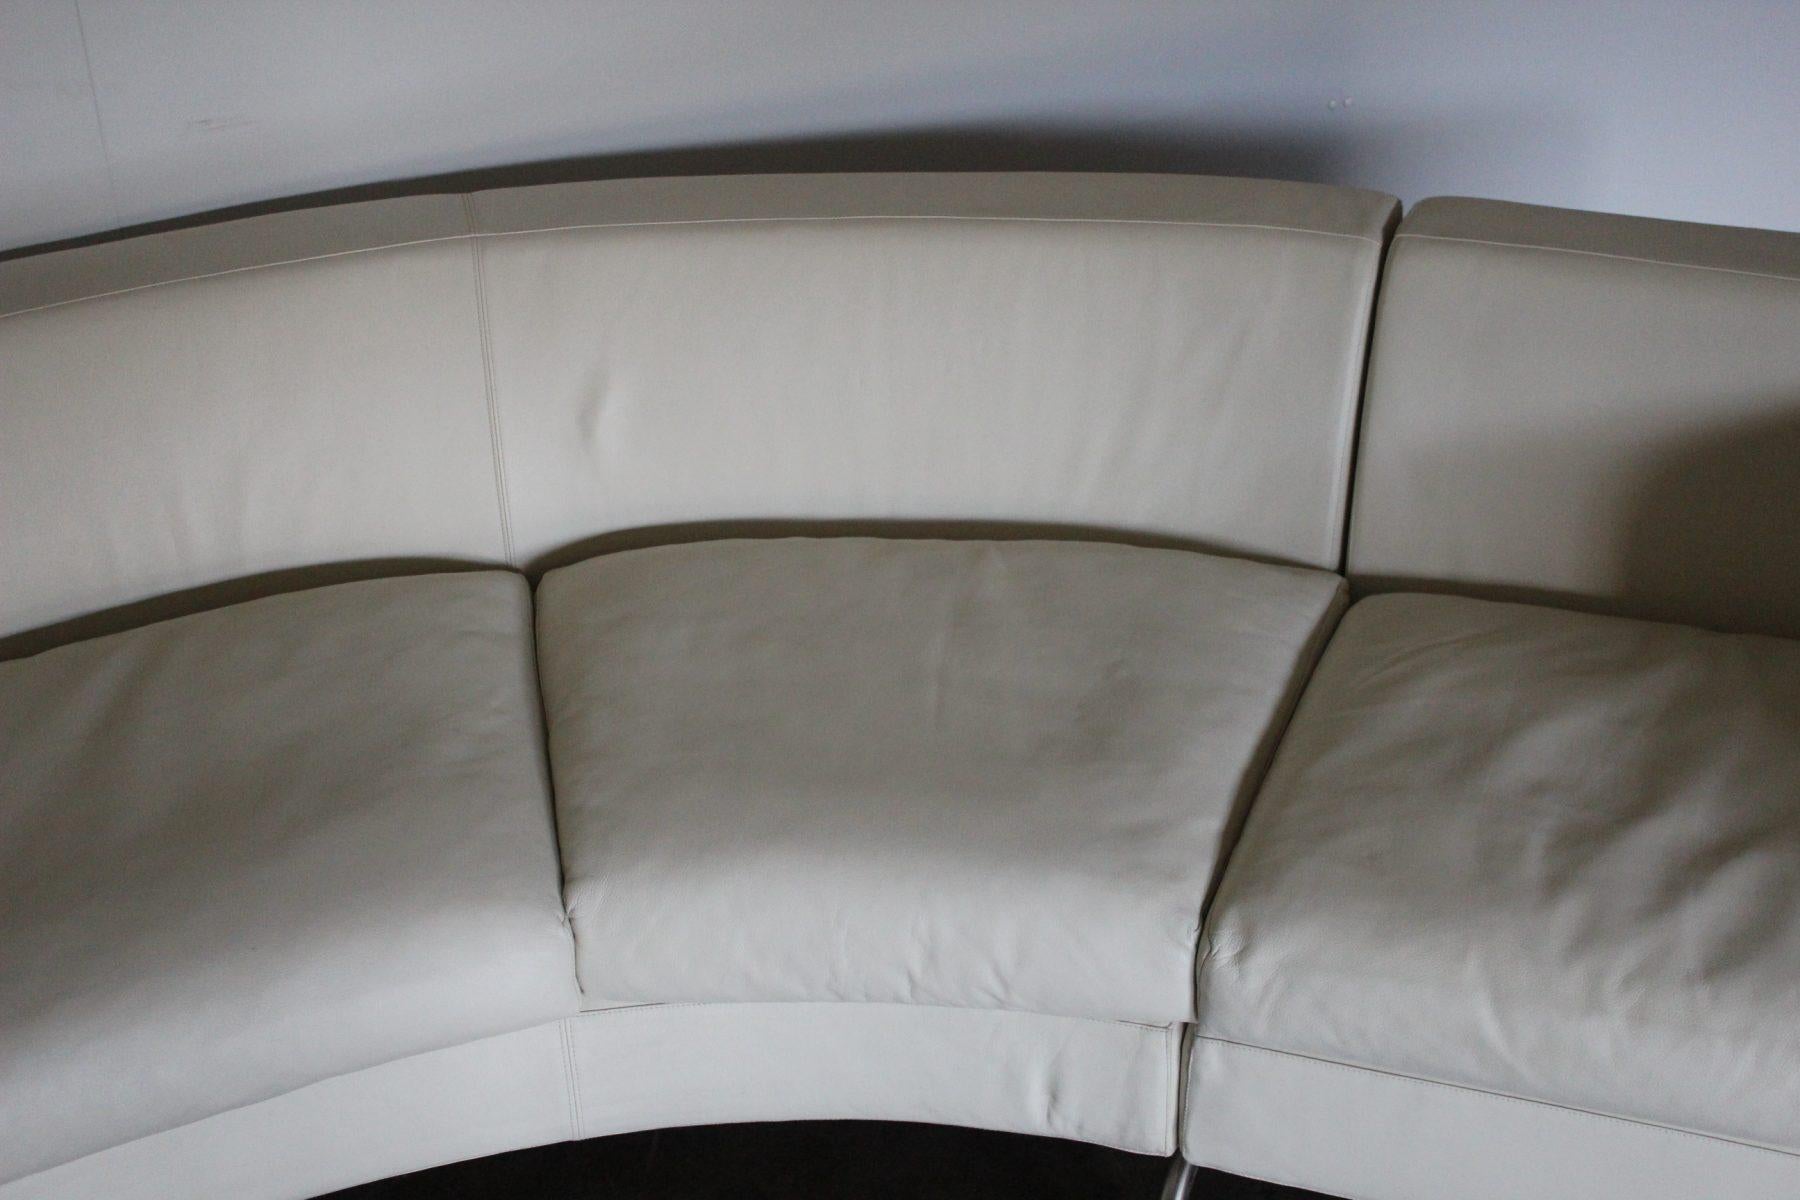 Rare Minotti “Dubuffet” Curved Sofa, in Cream “Pelle” Leather In Good Condition In Barrowford, GB